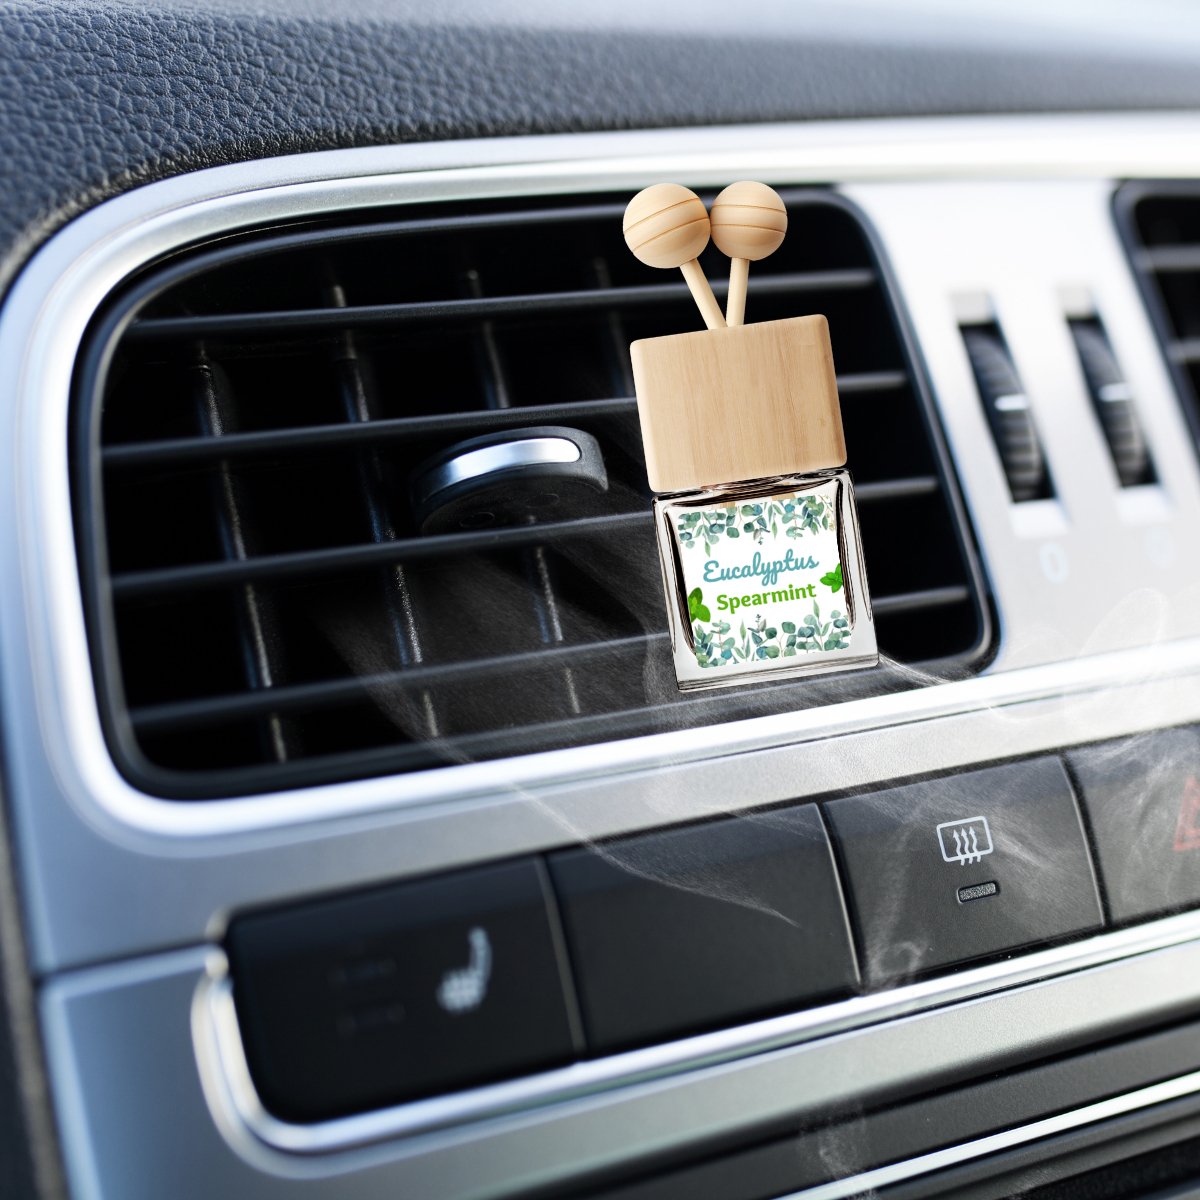 Eucalyptus Spearmint Scented Car Vent Air Freshener - Scents More